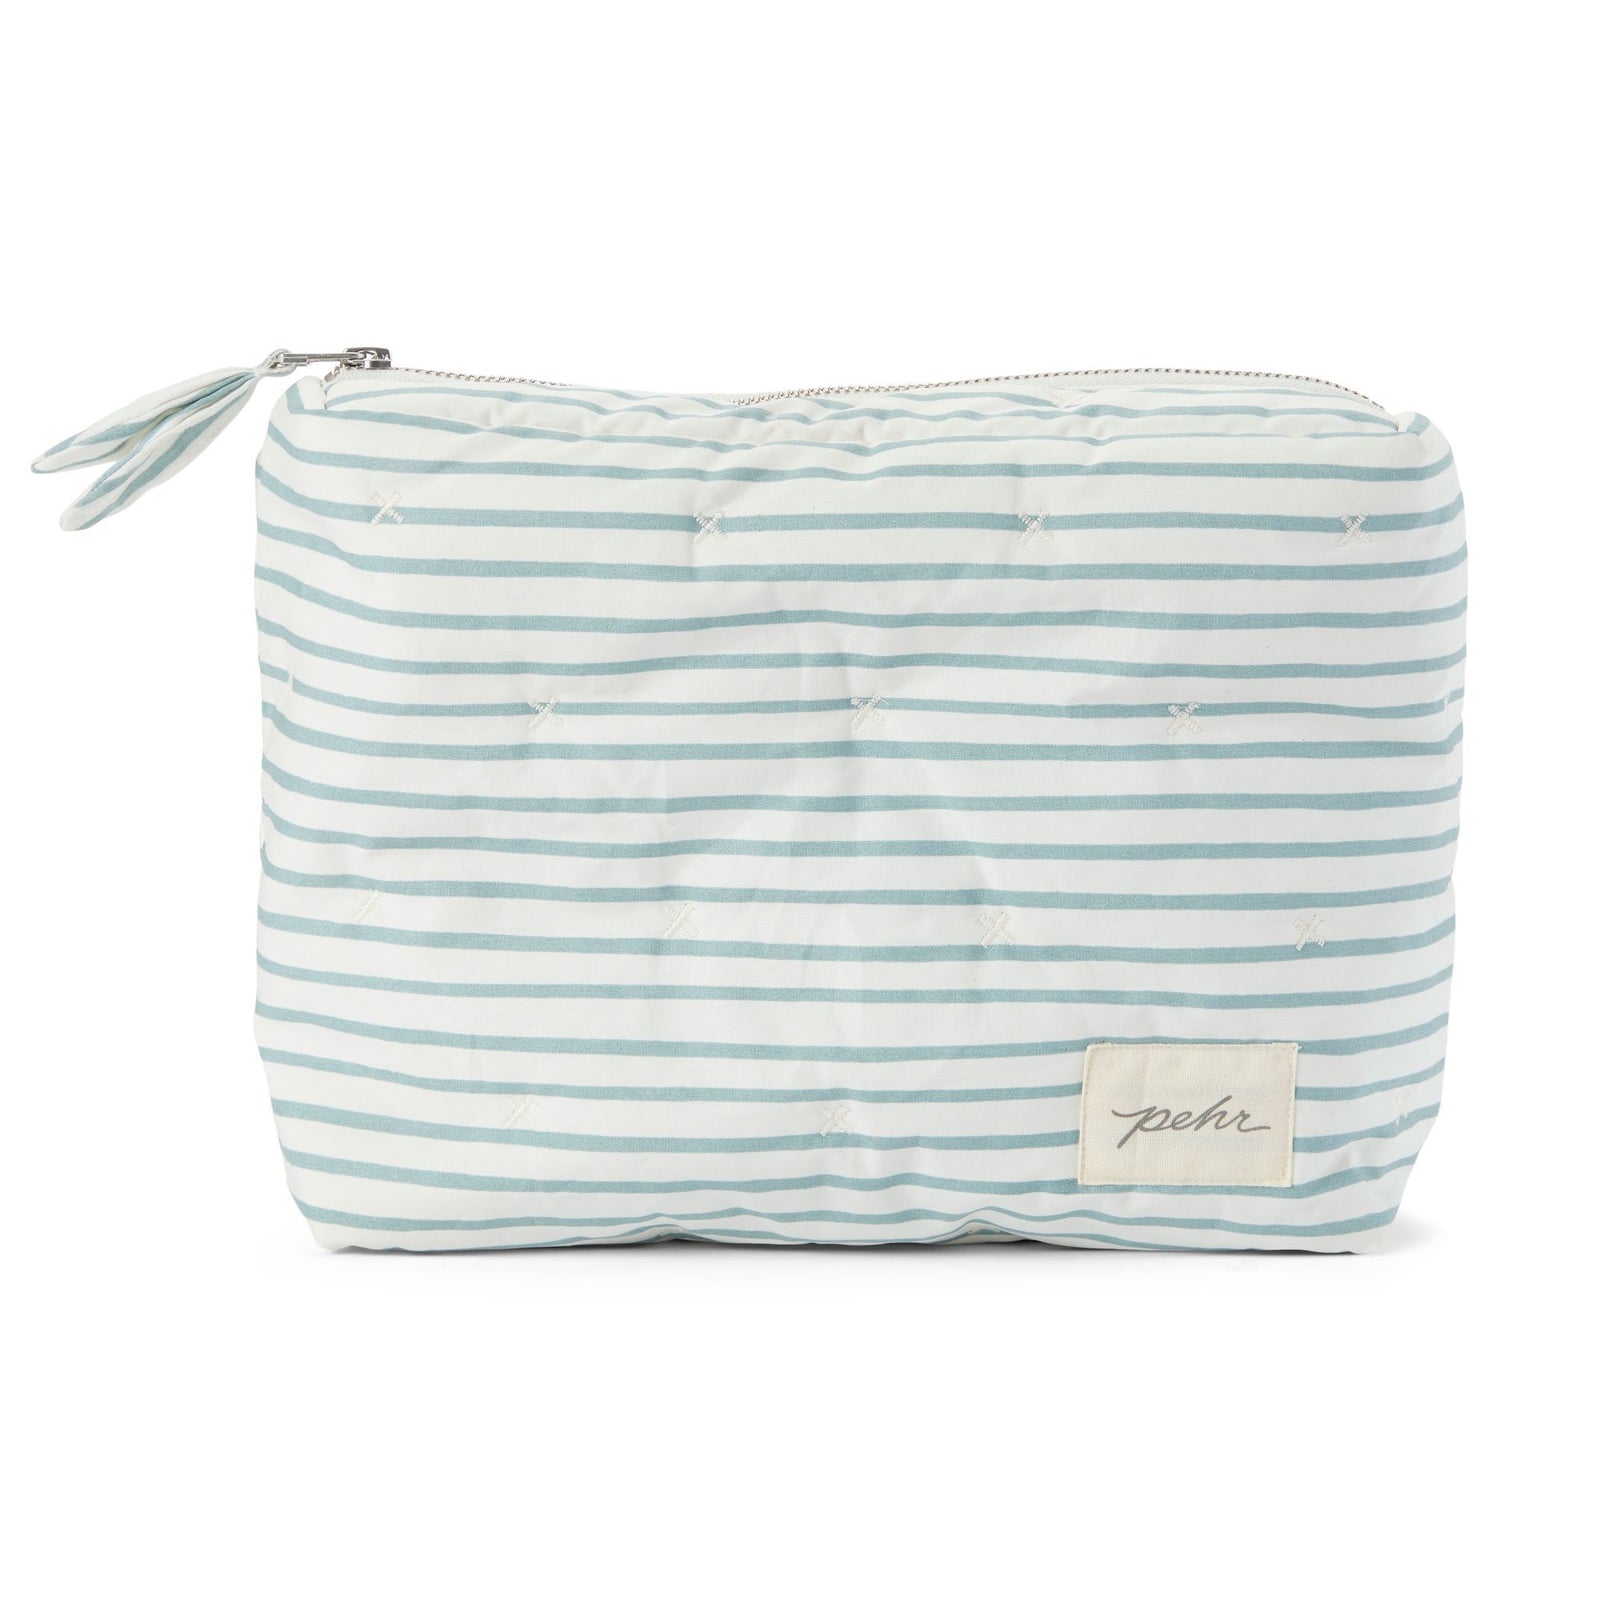 Pehr Deep Sea Organic On The Go Travel Pouch. GOTS Certified Organic Cotton & Dyes. White with blue stripes and zippered close.